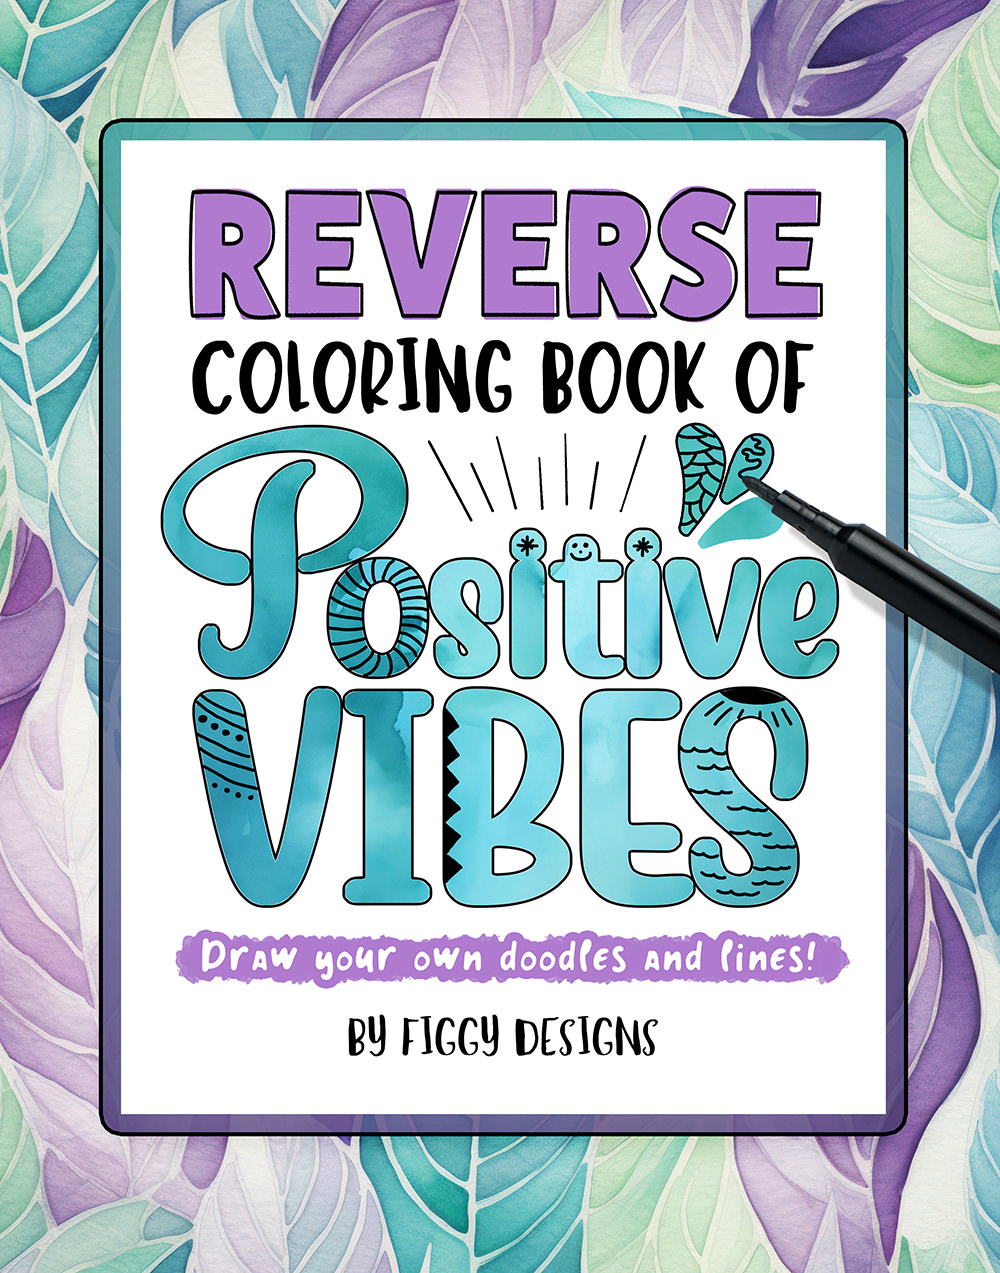 Reverse Coloring Book of Positive Vibes